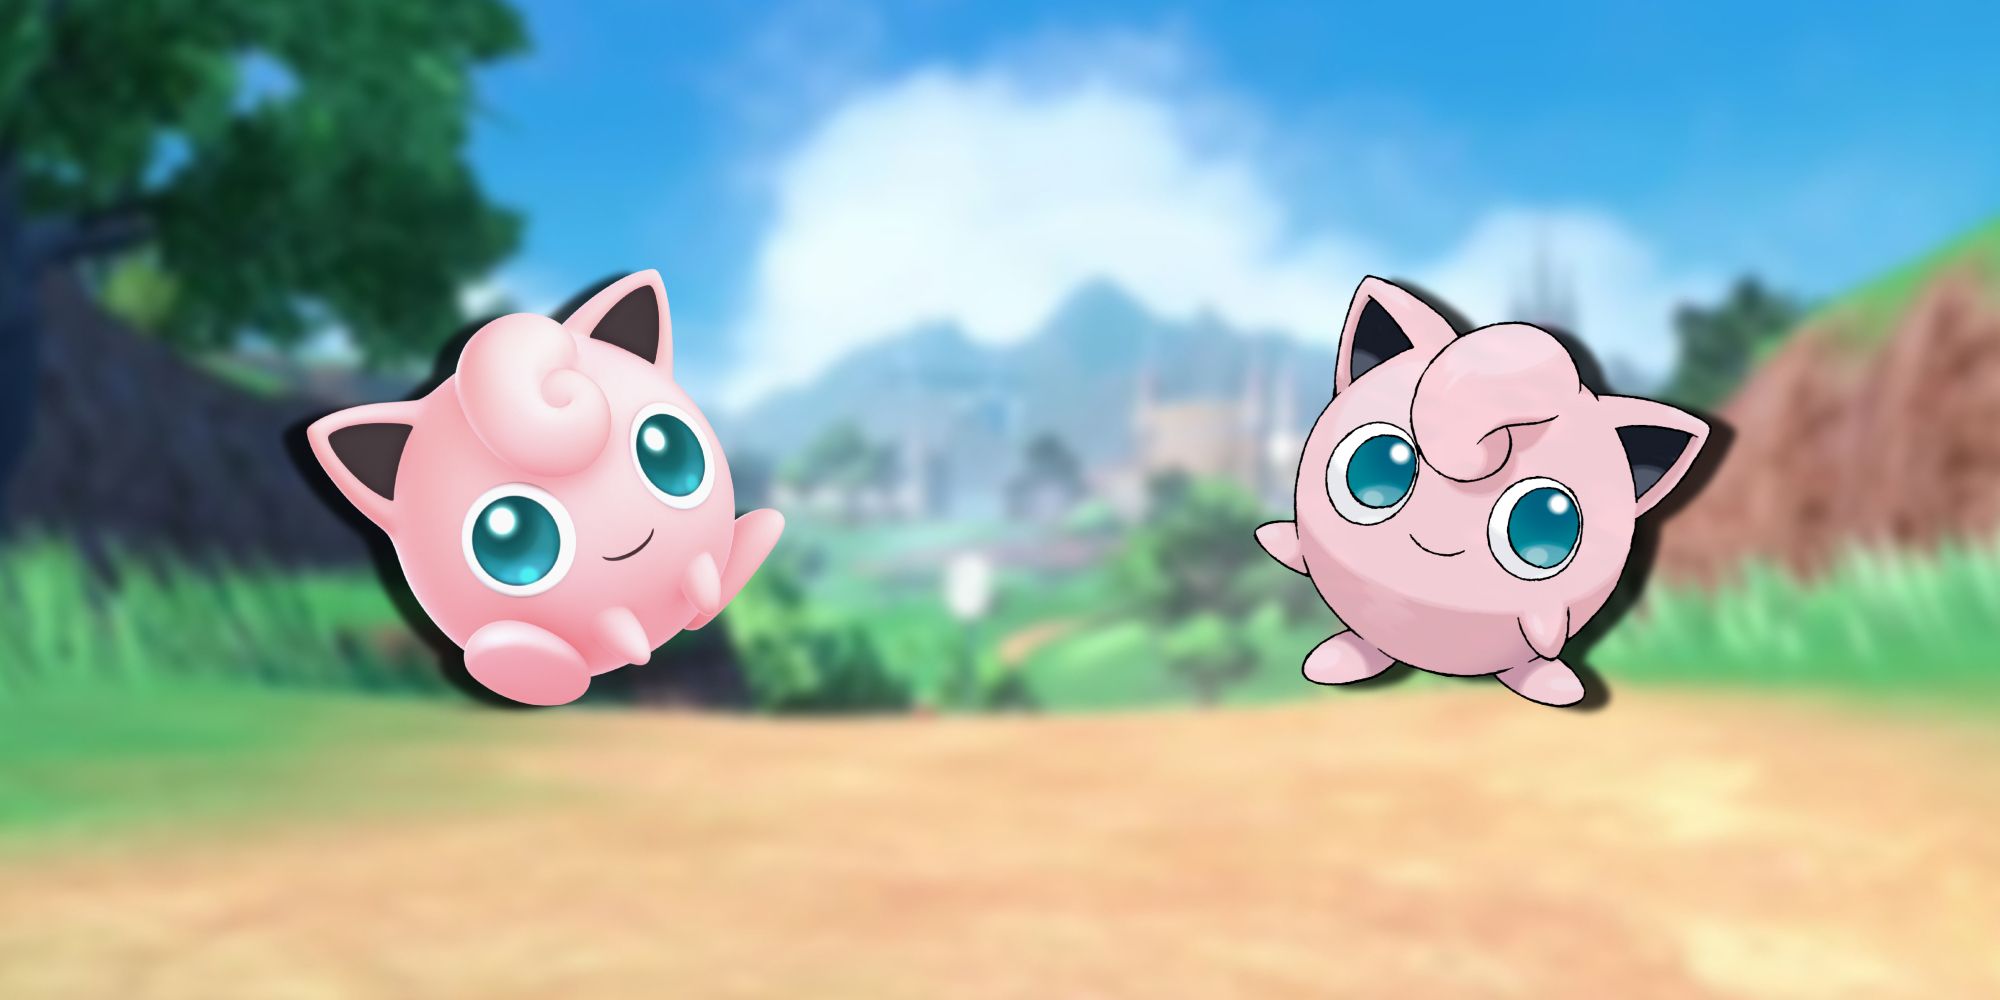 The pokemon Jigglypuff is the cutest pokemon but could easily kill a human if provoked